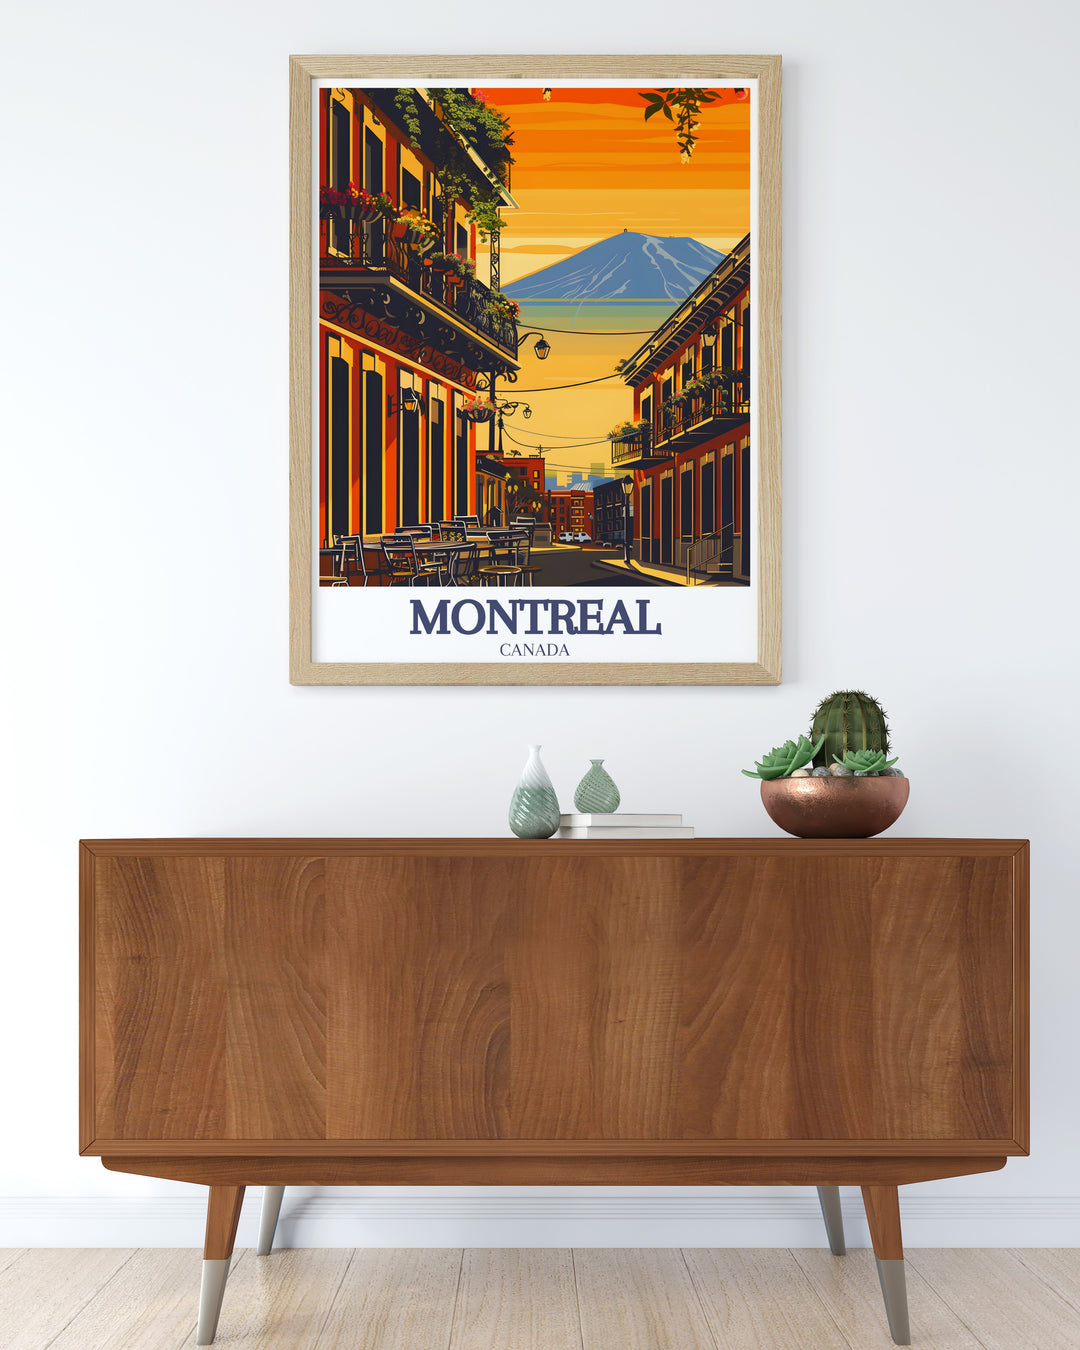 Vintage style print of Rue Crescent and Mount Royal offering a blend of urban energy and natural beauty perfect for adding sophistication to any room or as a thoughtful Canada gift for friends and family.